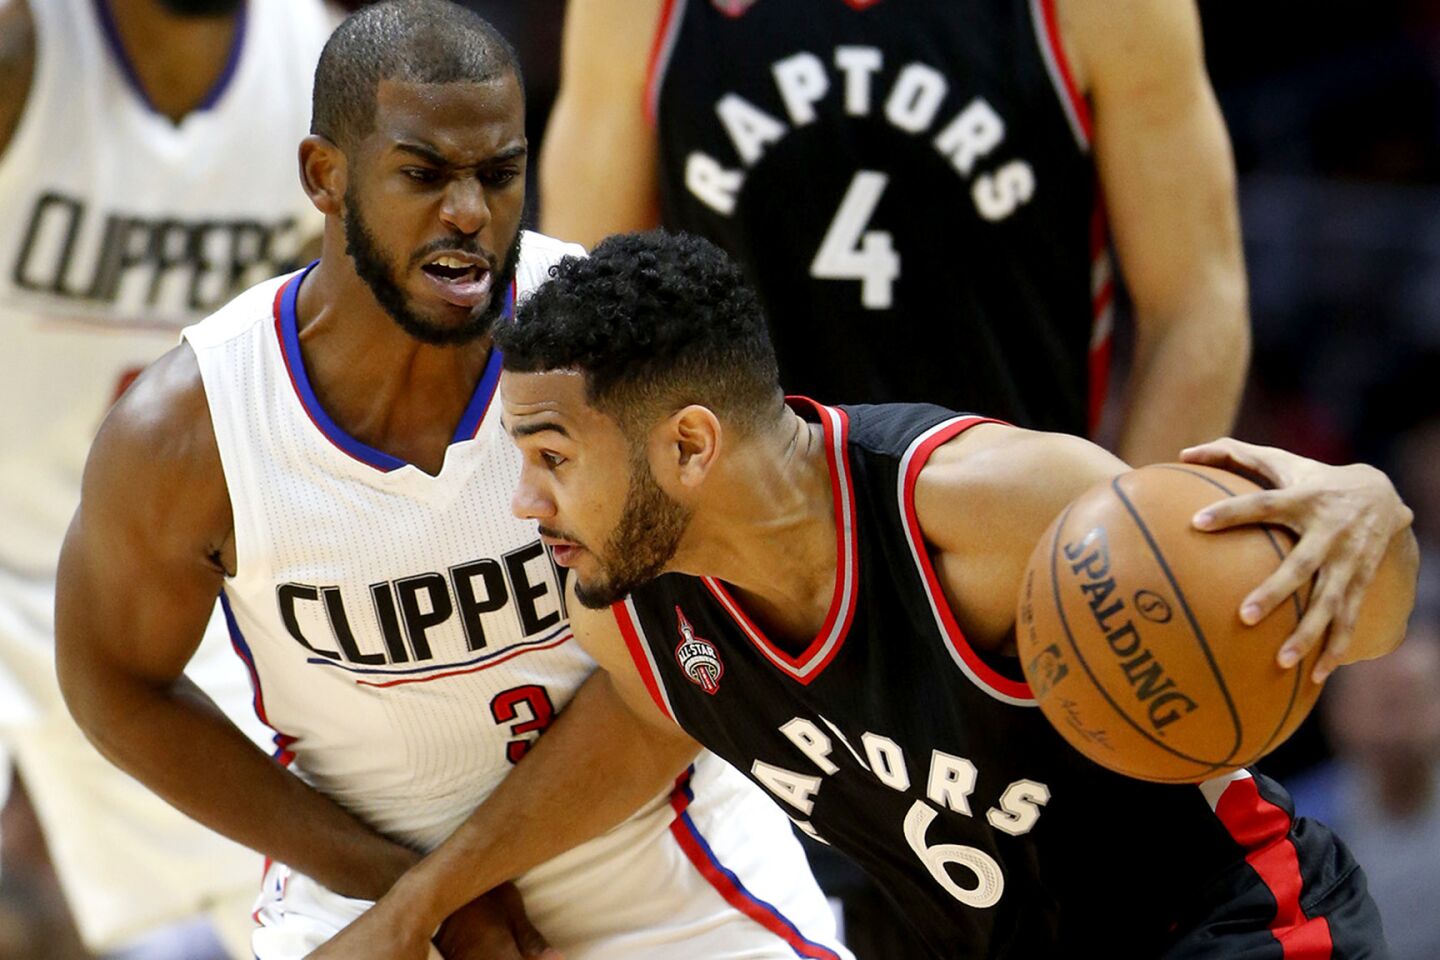 Five takeaways from the Clippers' 91-80 loss to the Toronto Raptors